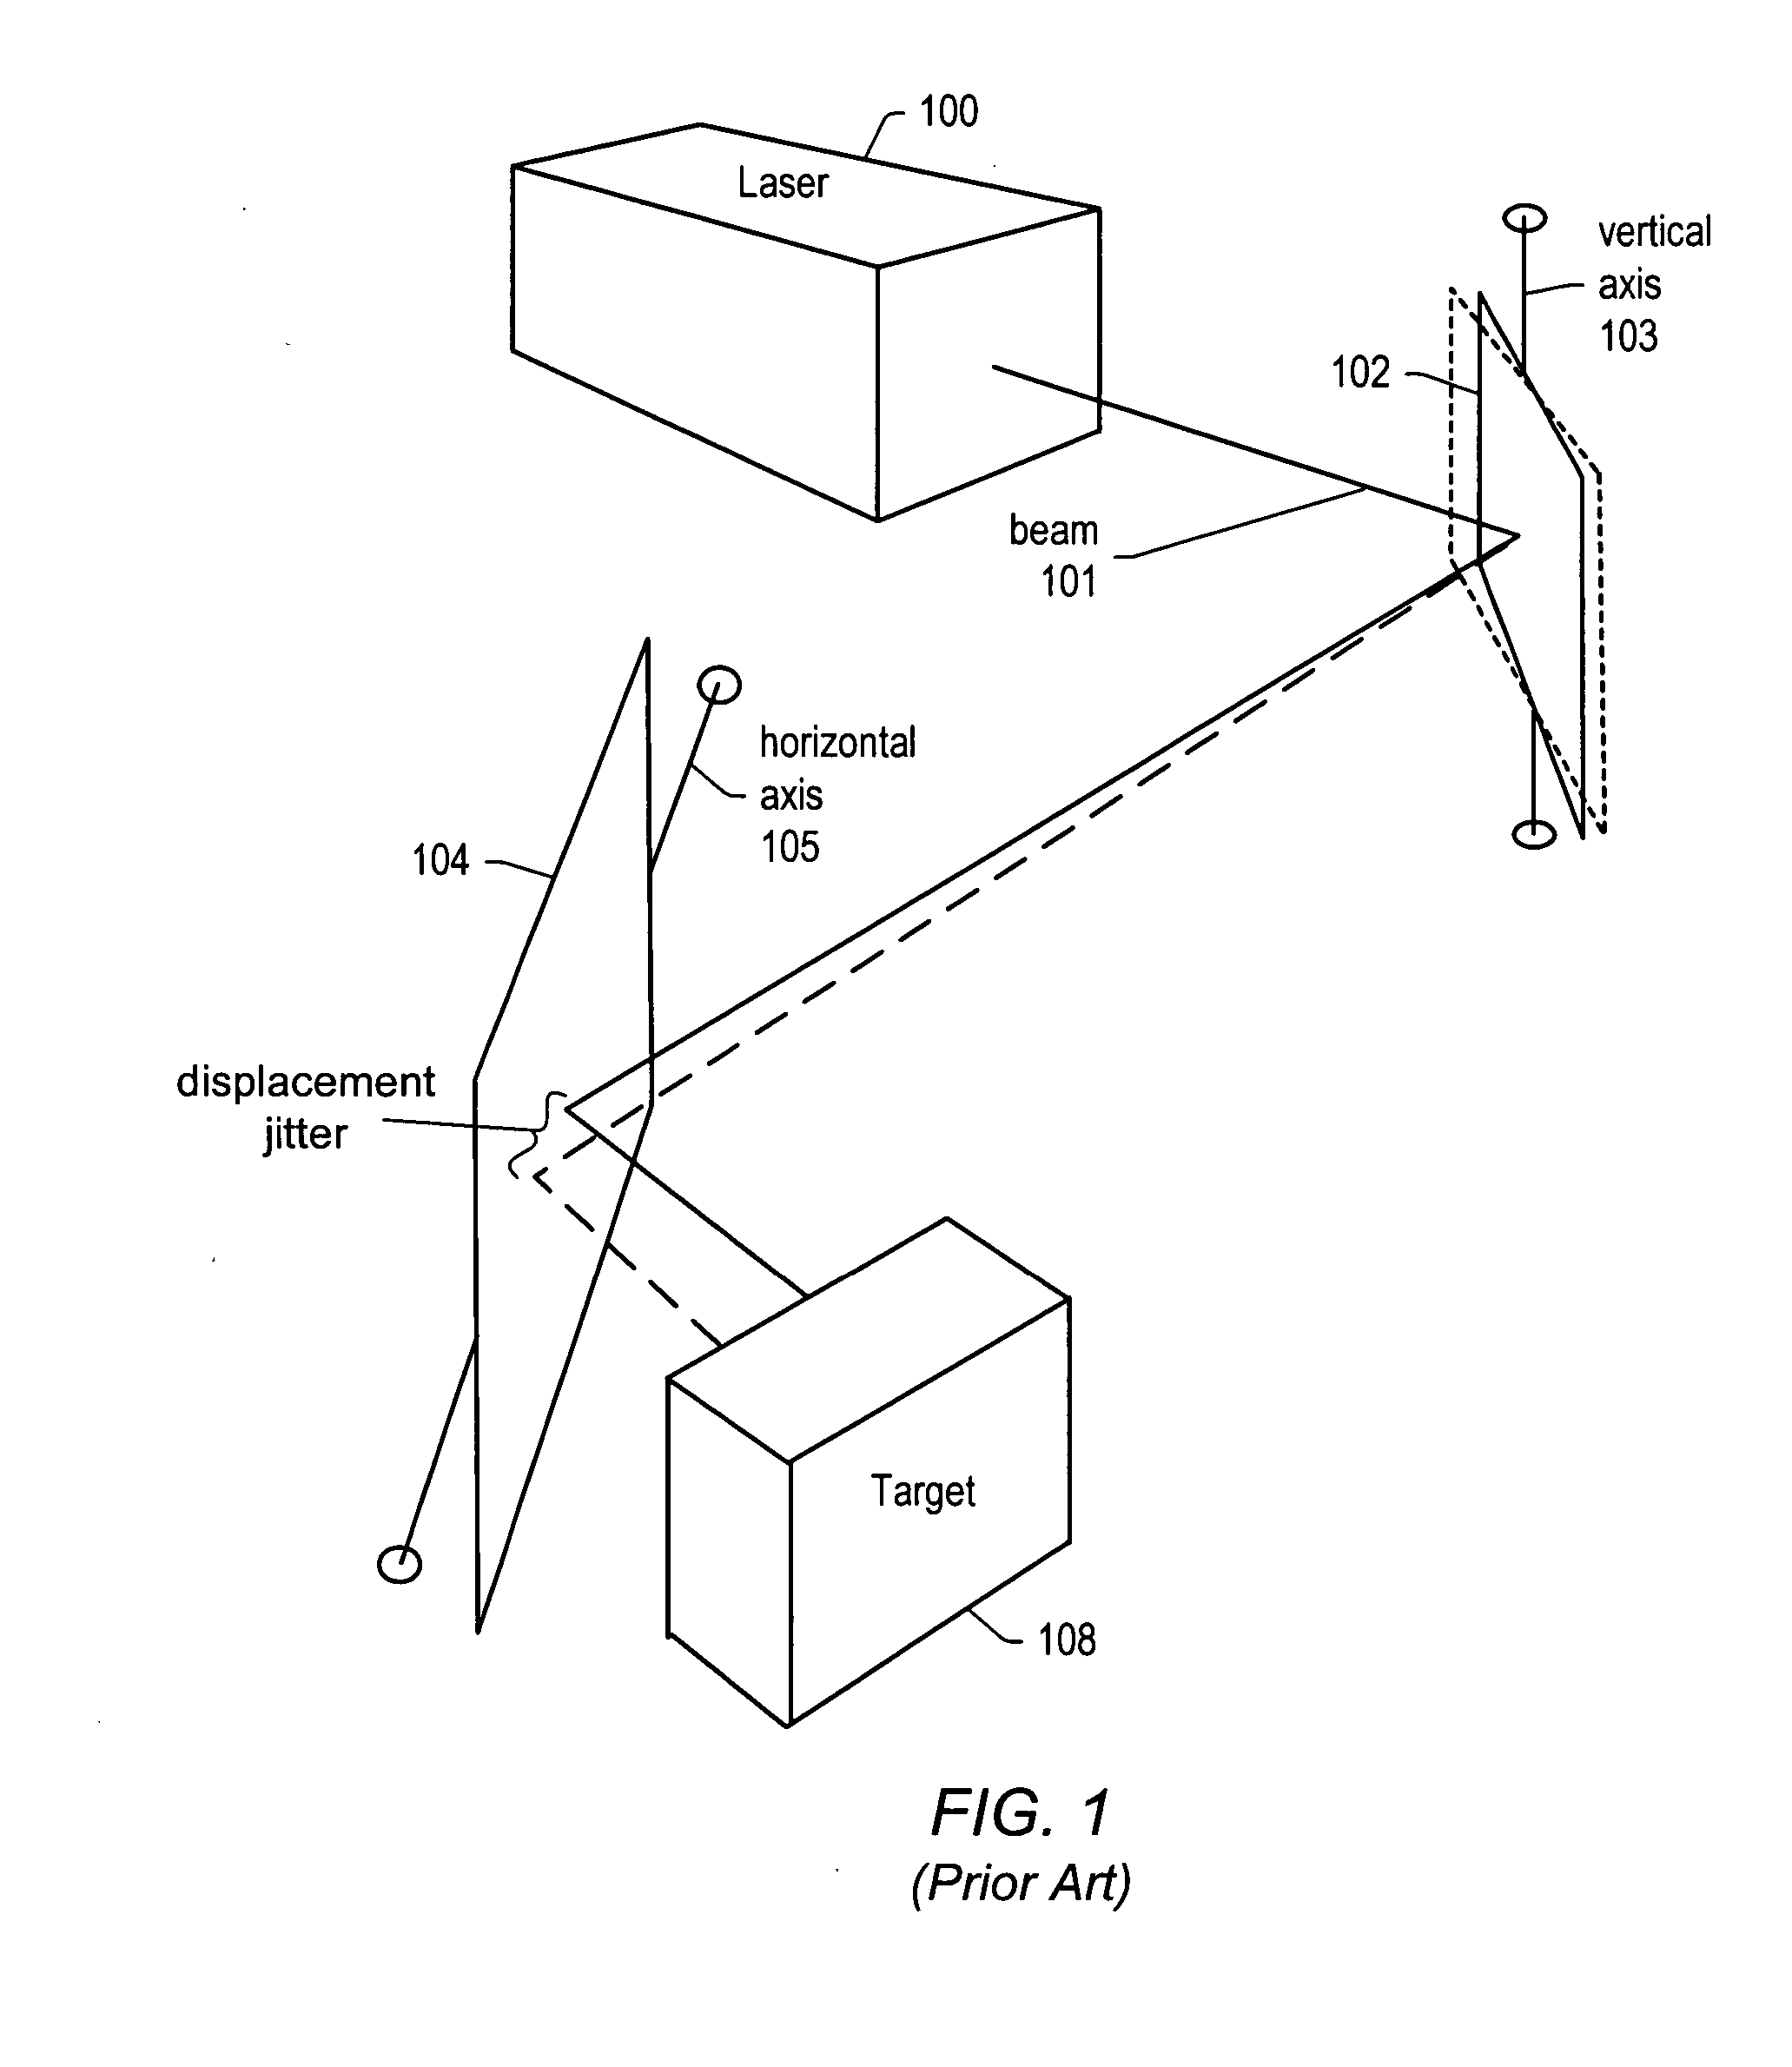 Parallel-beam scanning for surface patterning of materials